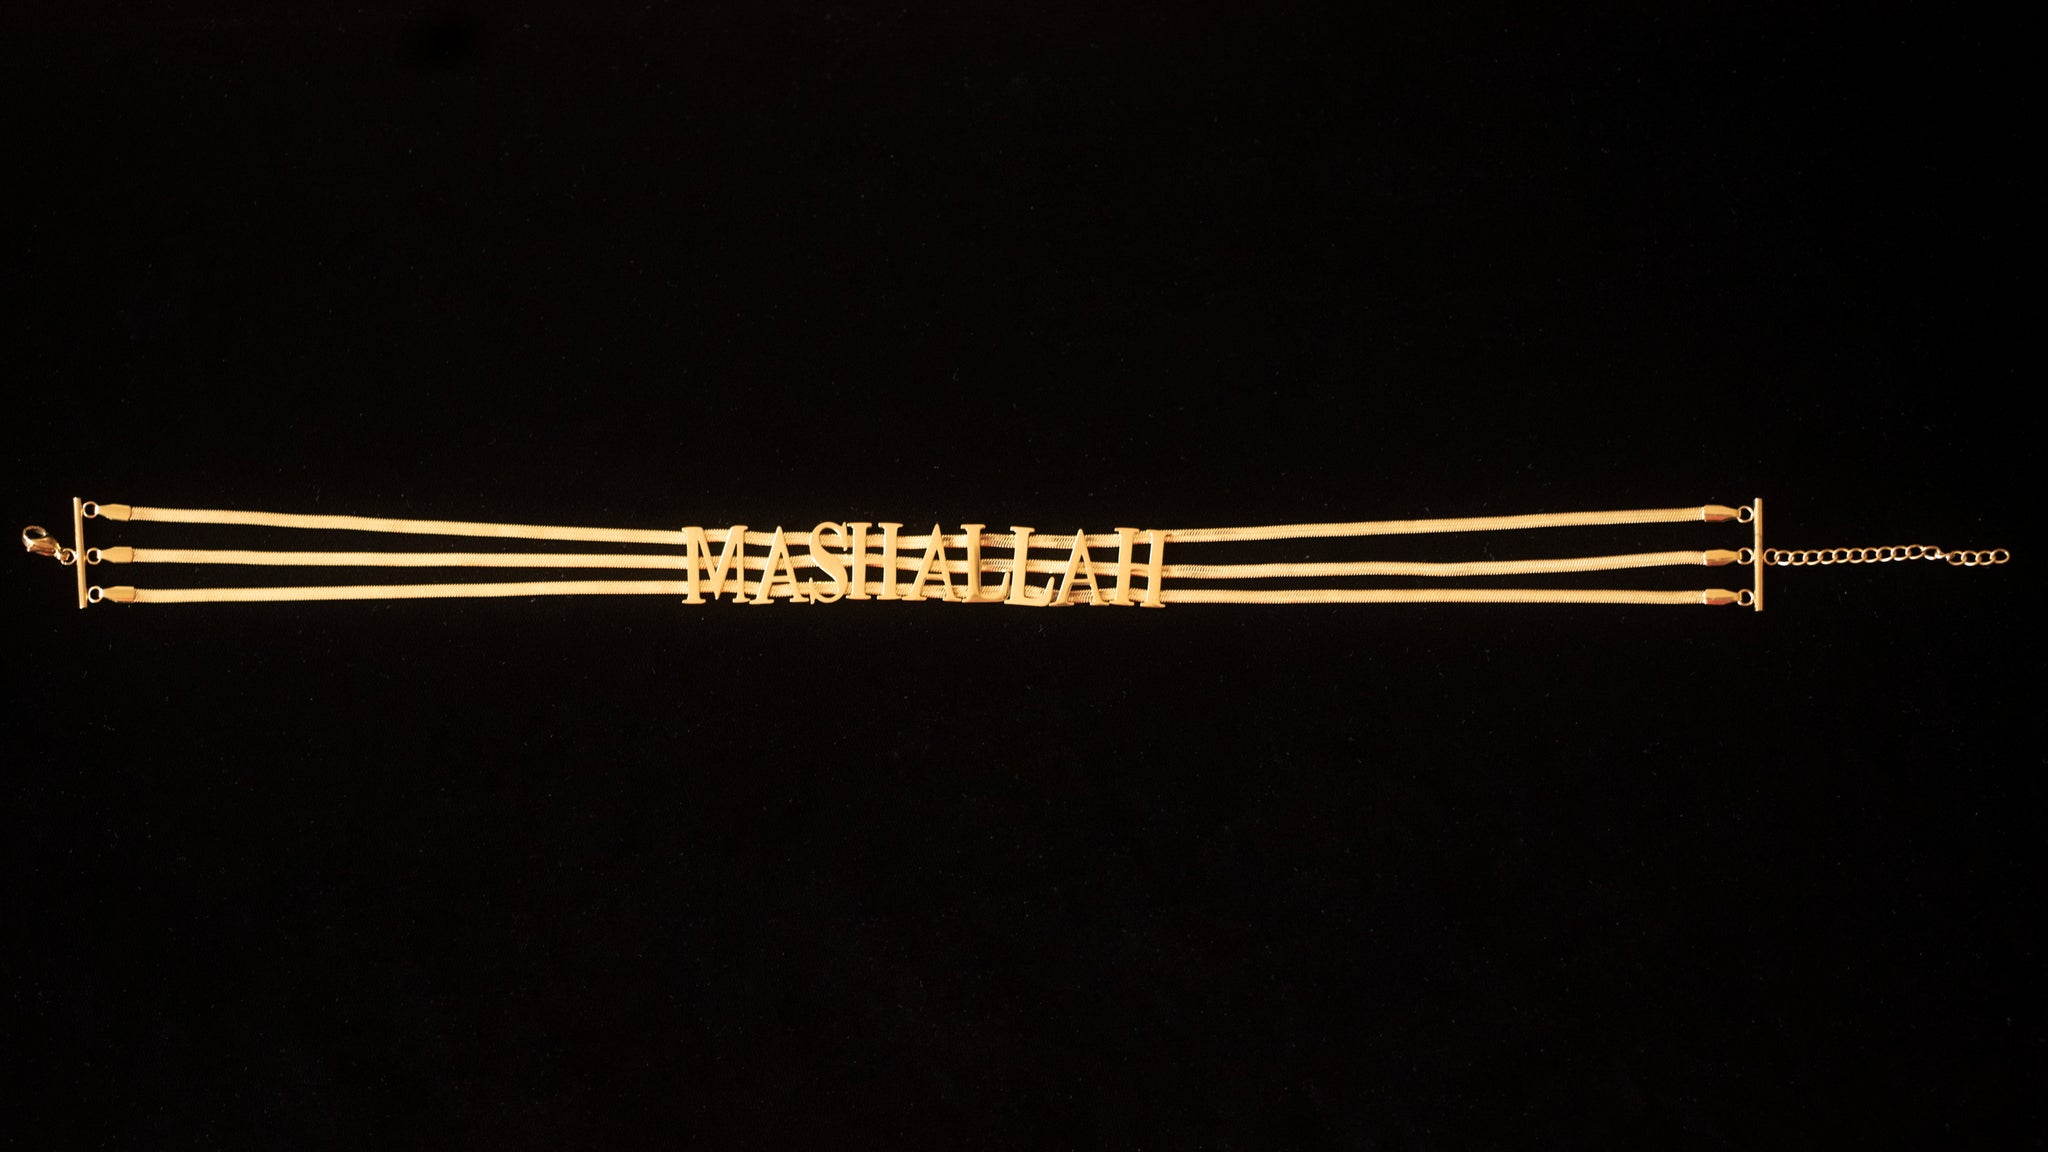 Against a black back drop sits a gold choker chain with the word MASHALLAH written on it.